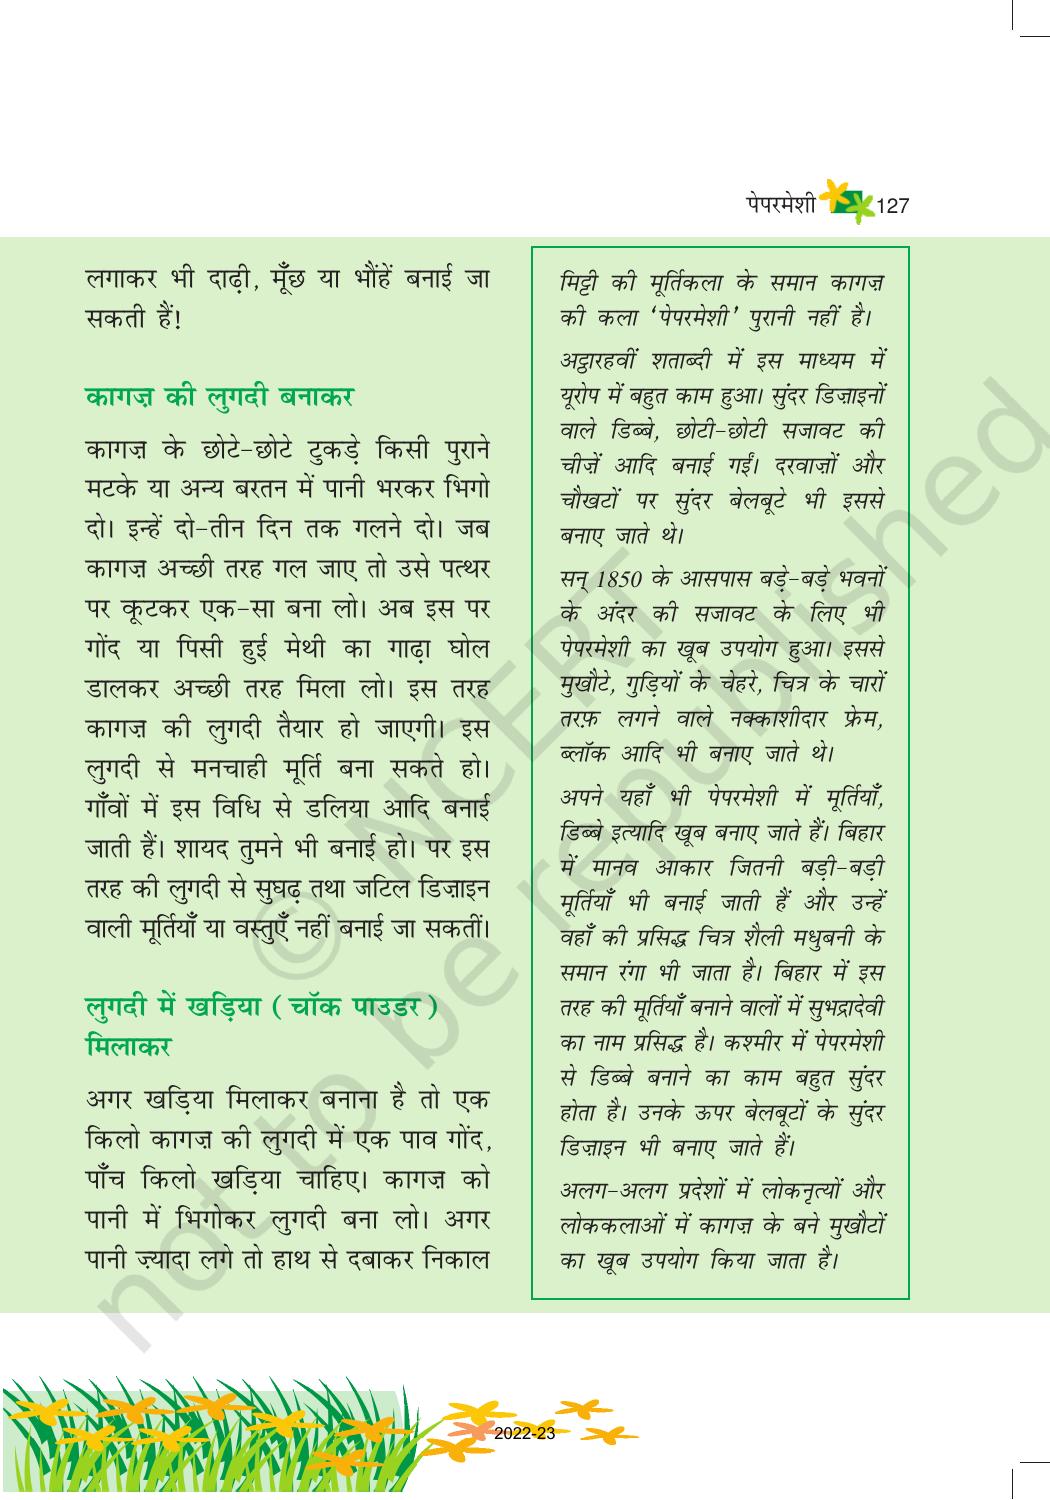 NCERT Book for Class 6 Hindi(Vasant Bhag 1) : Chapter 17-साँस – साँस में बांस - Page 10